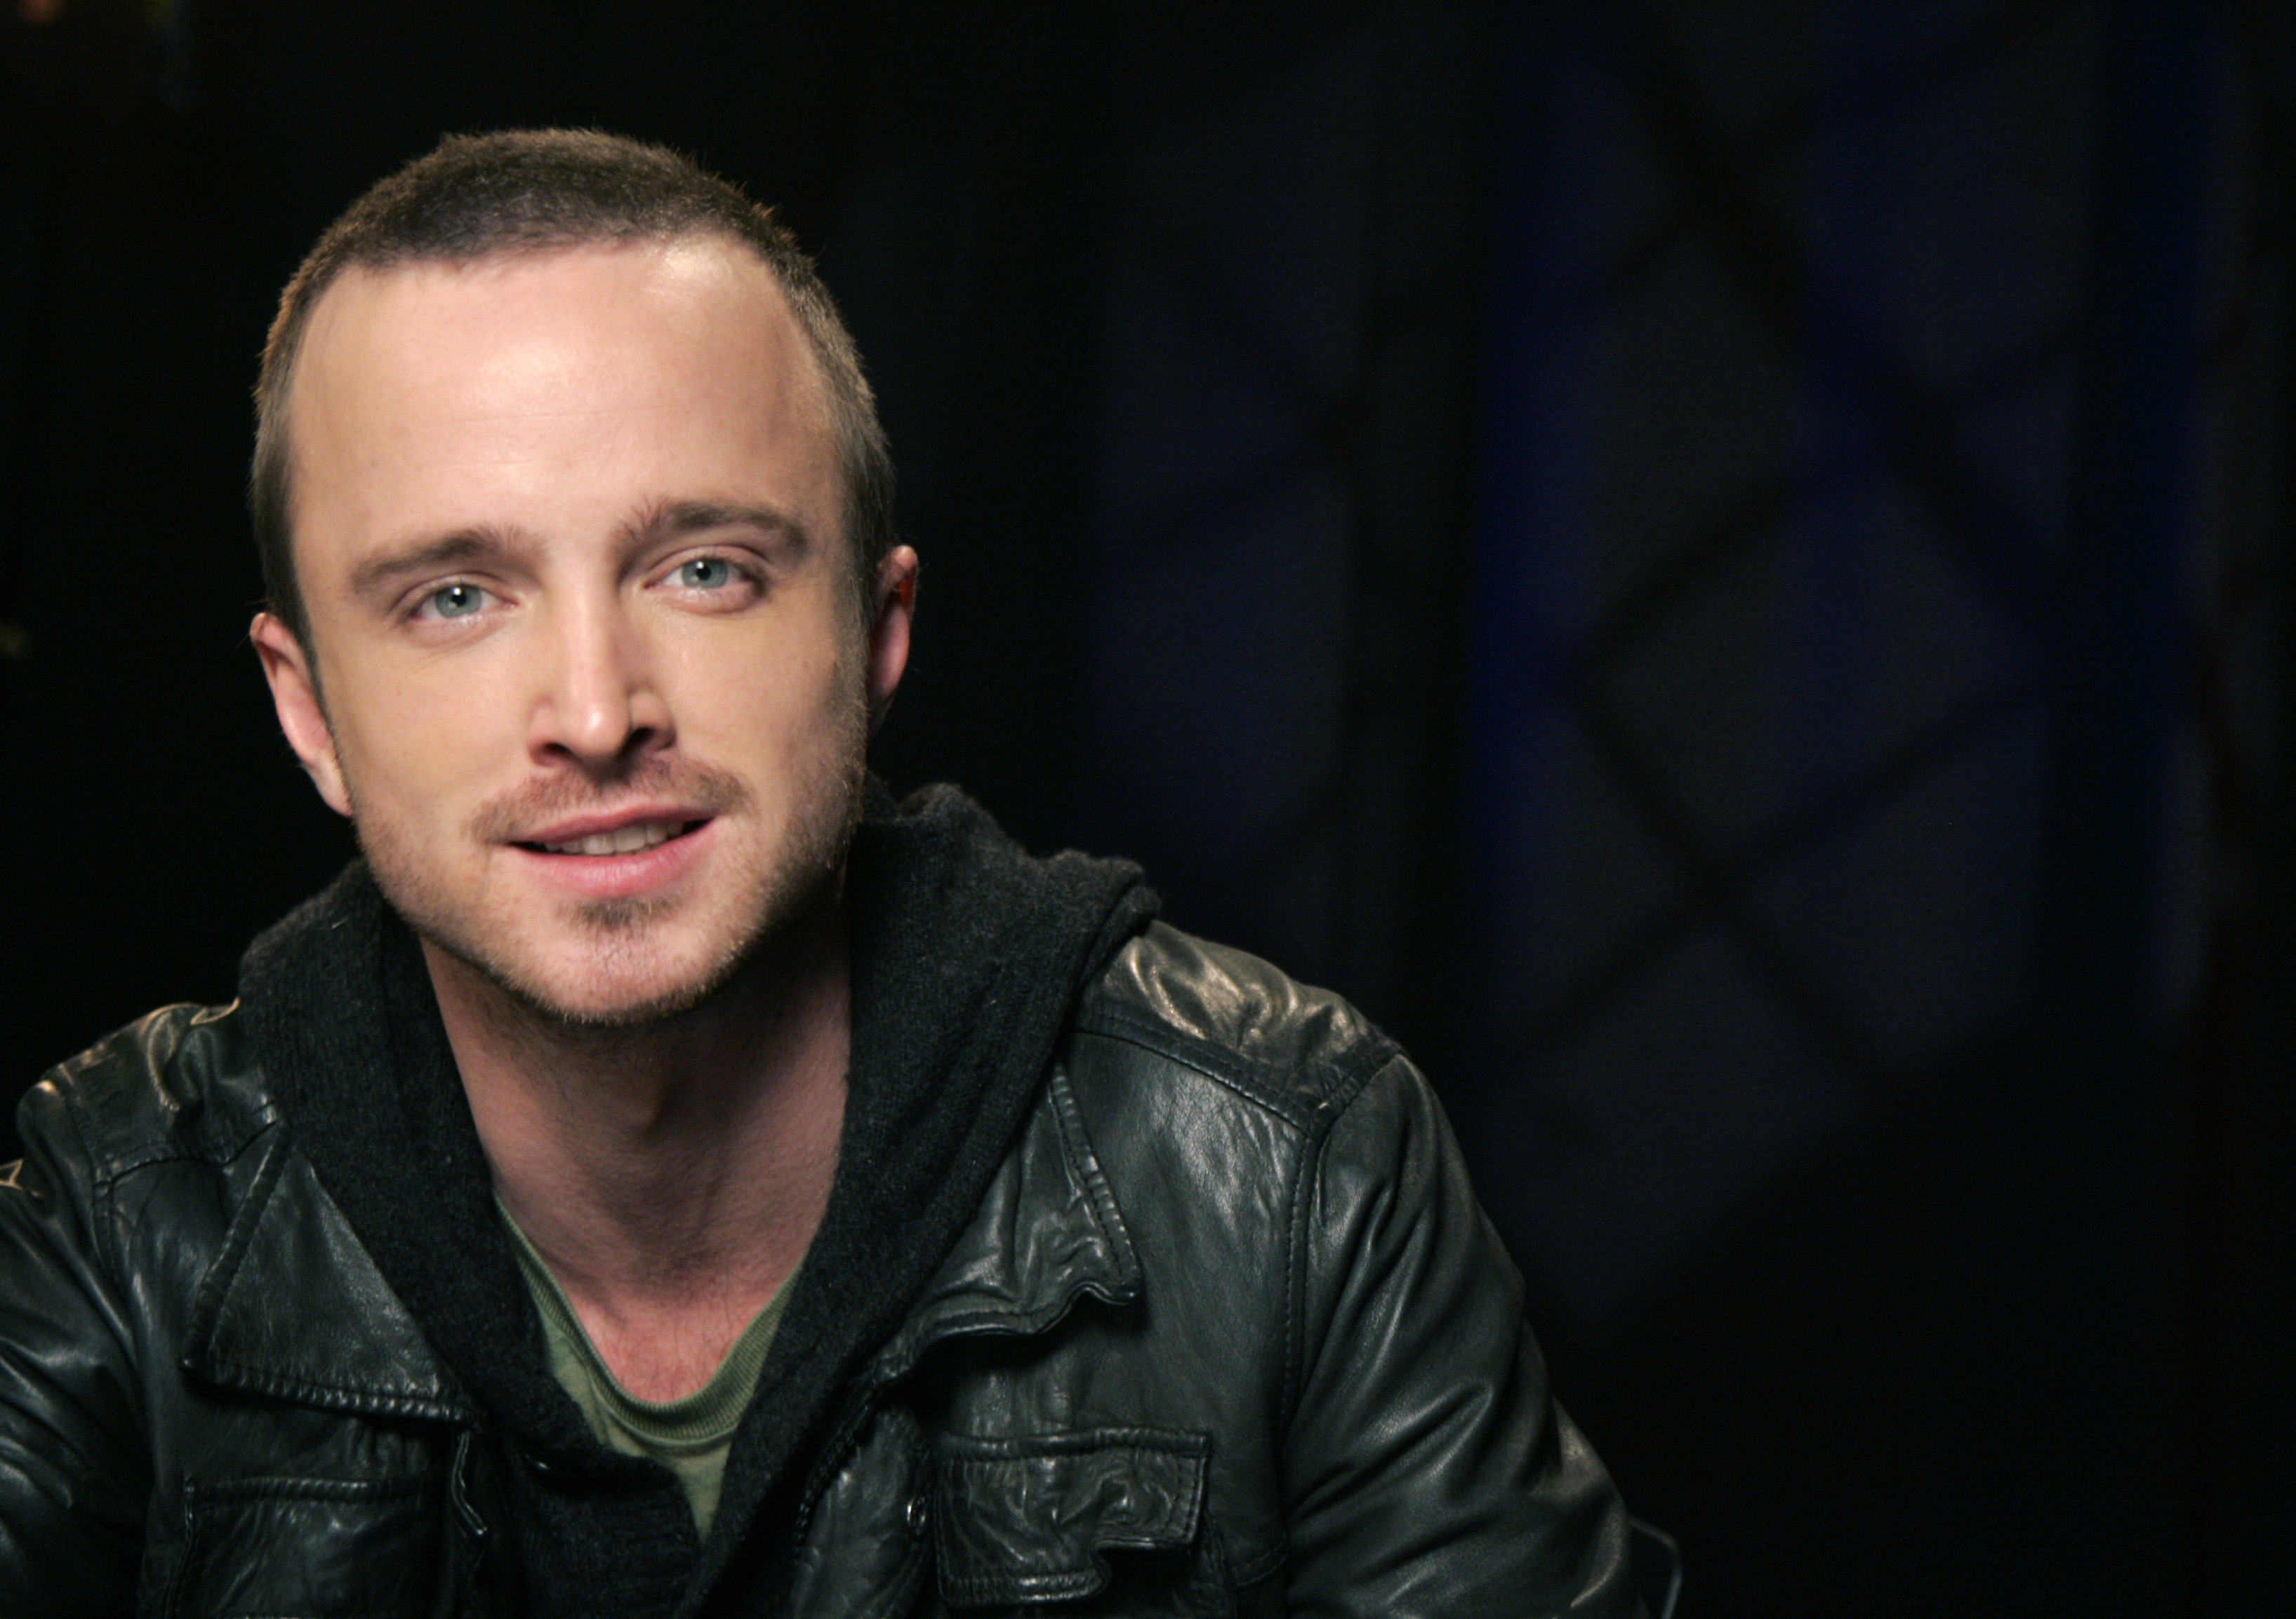 Actor Aaron Paul poses for a portrait in New York, Tuesday, March 16, 2010. (AP Photo/Jeff Christensen)